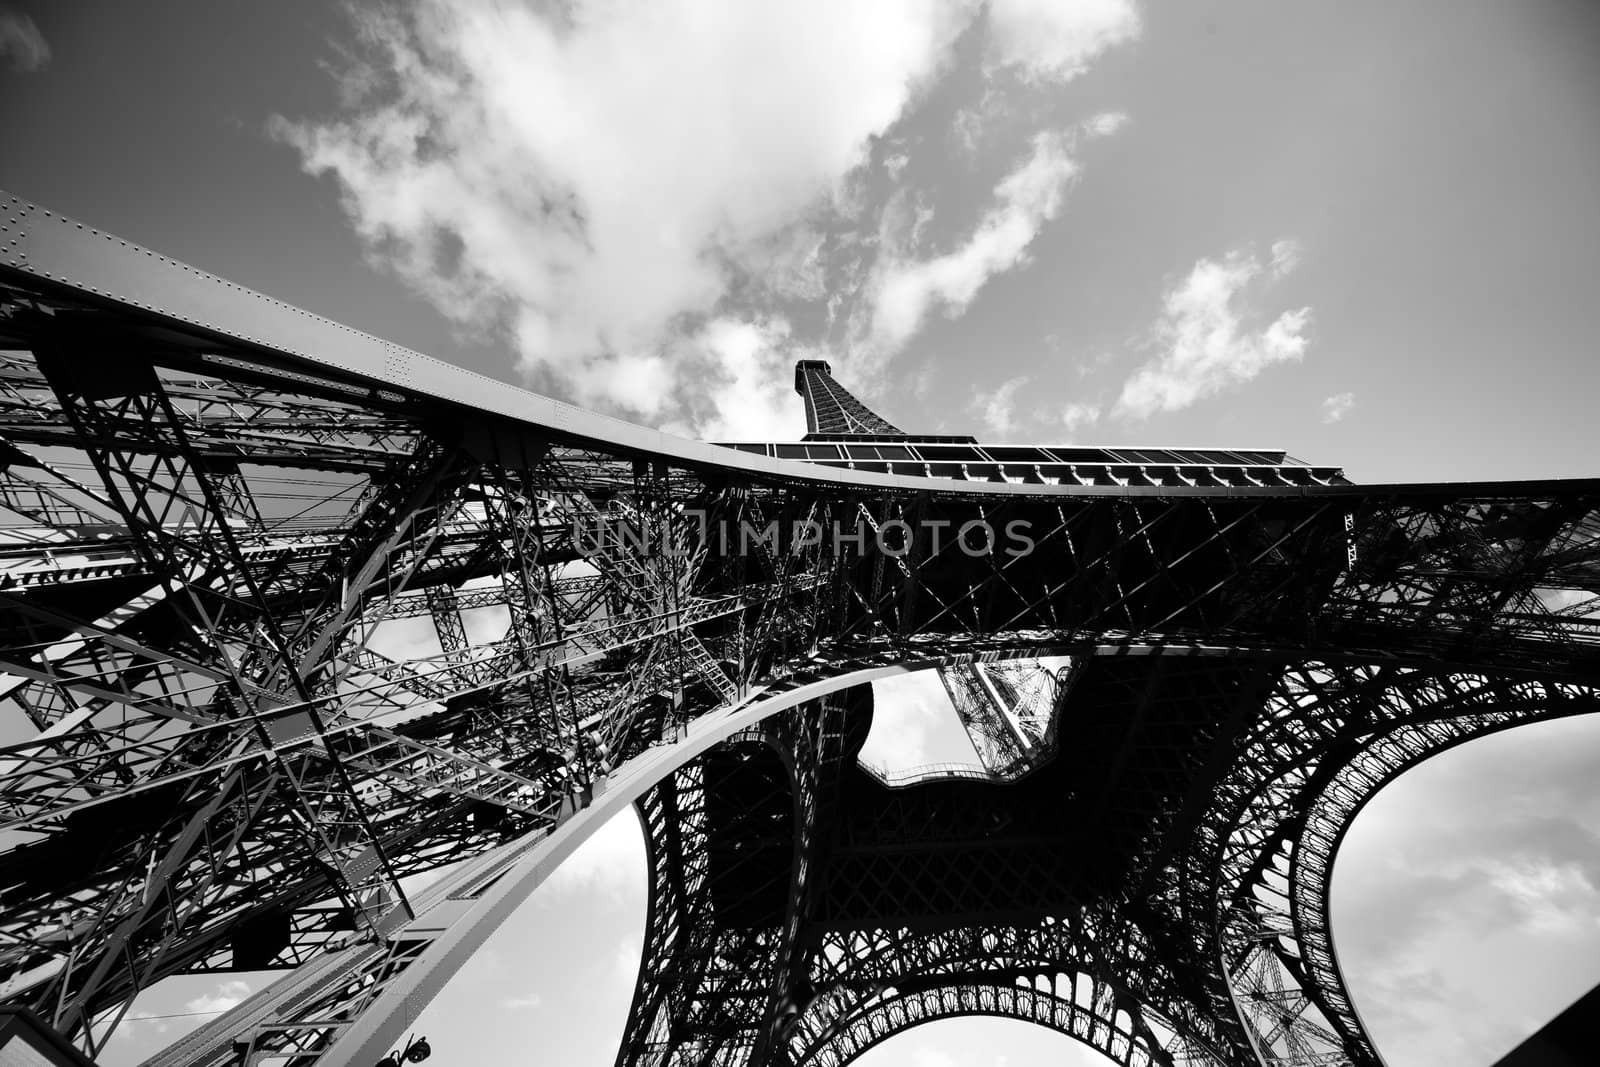 a wide angle view of Eiffel Tower